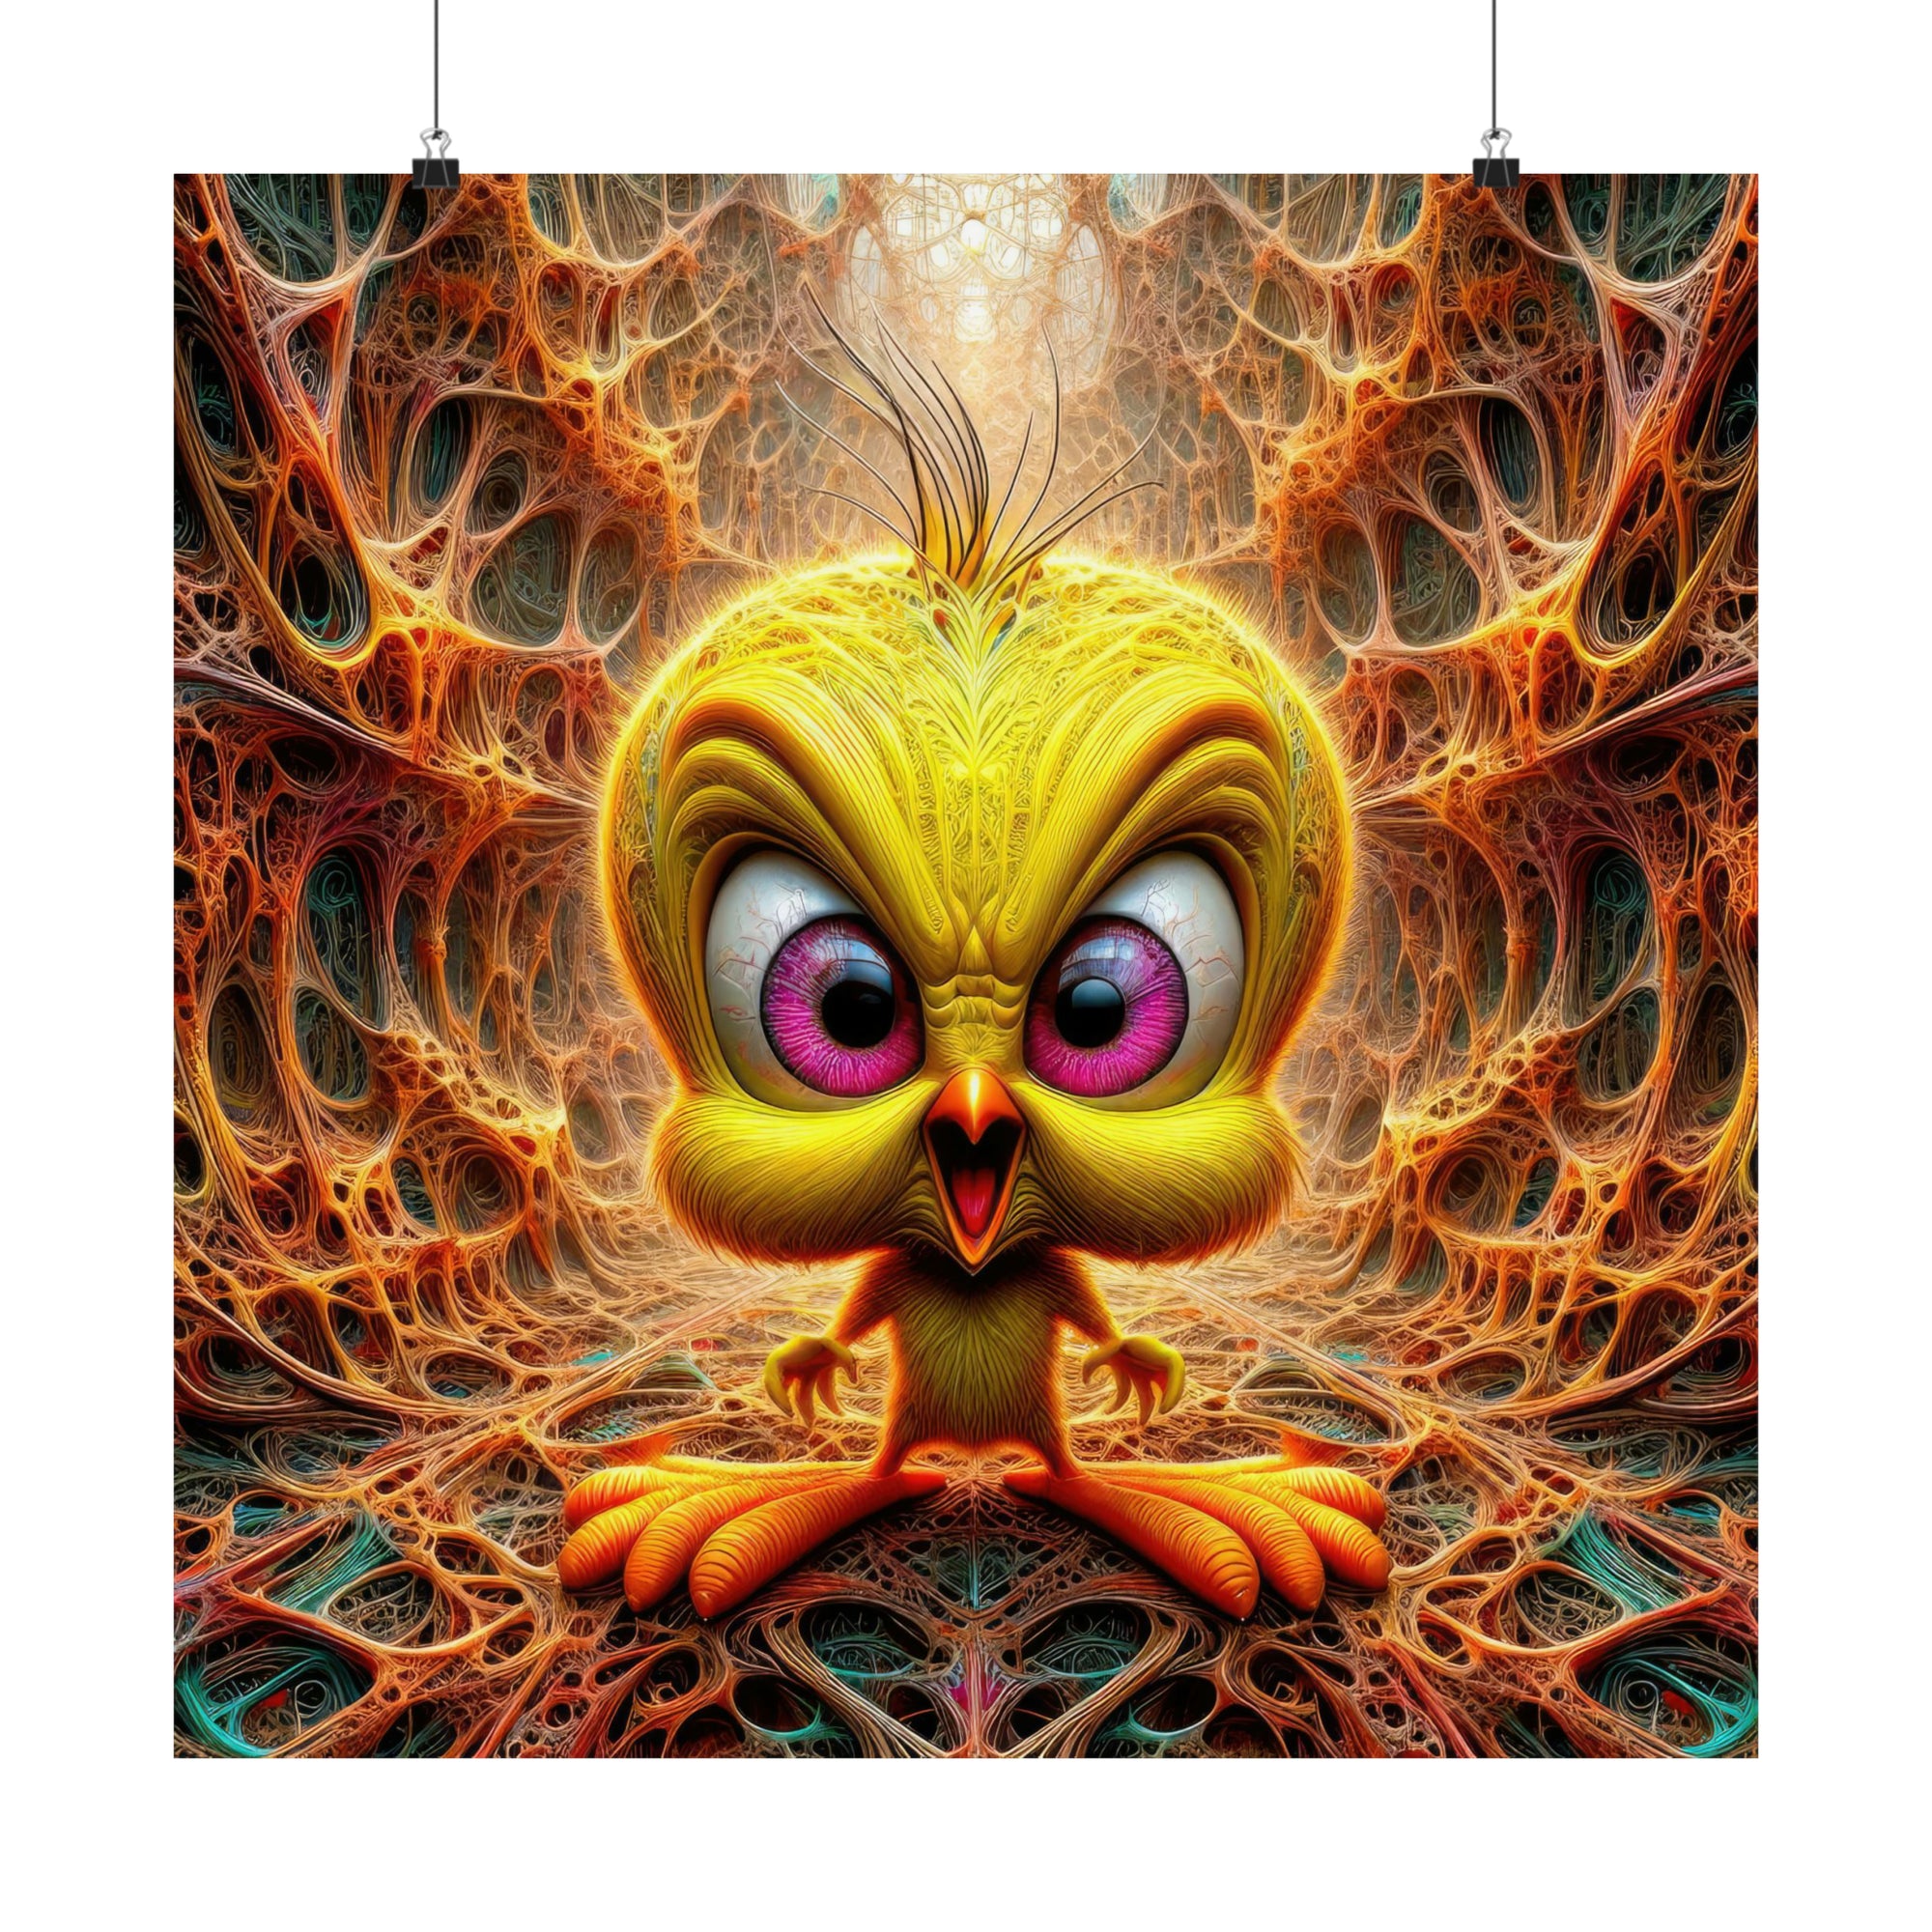 The Malevolent Mirth of Twisted Tweety Poster